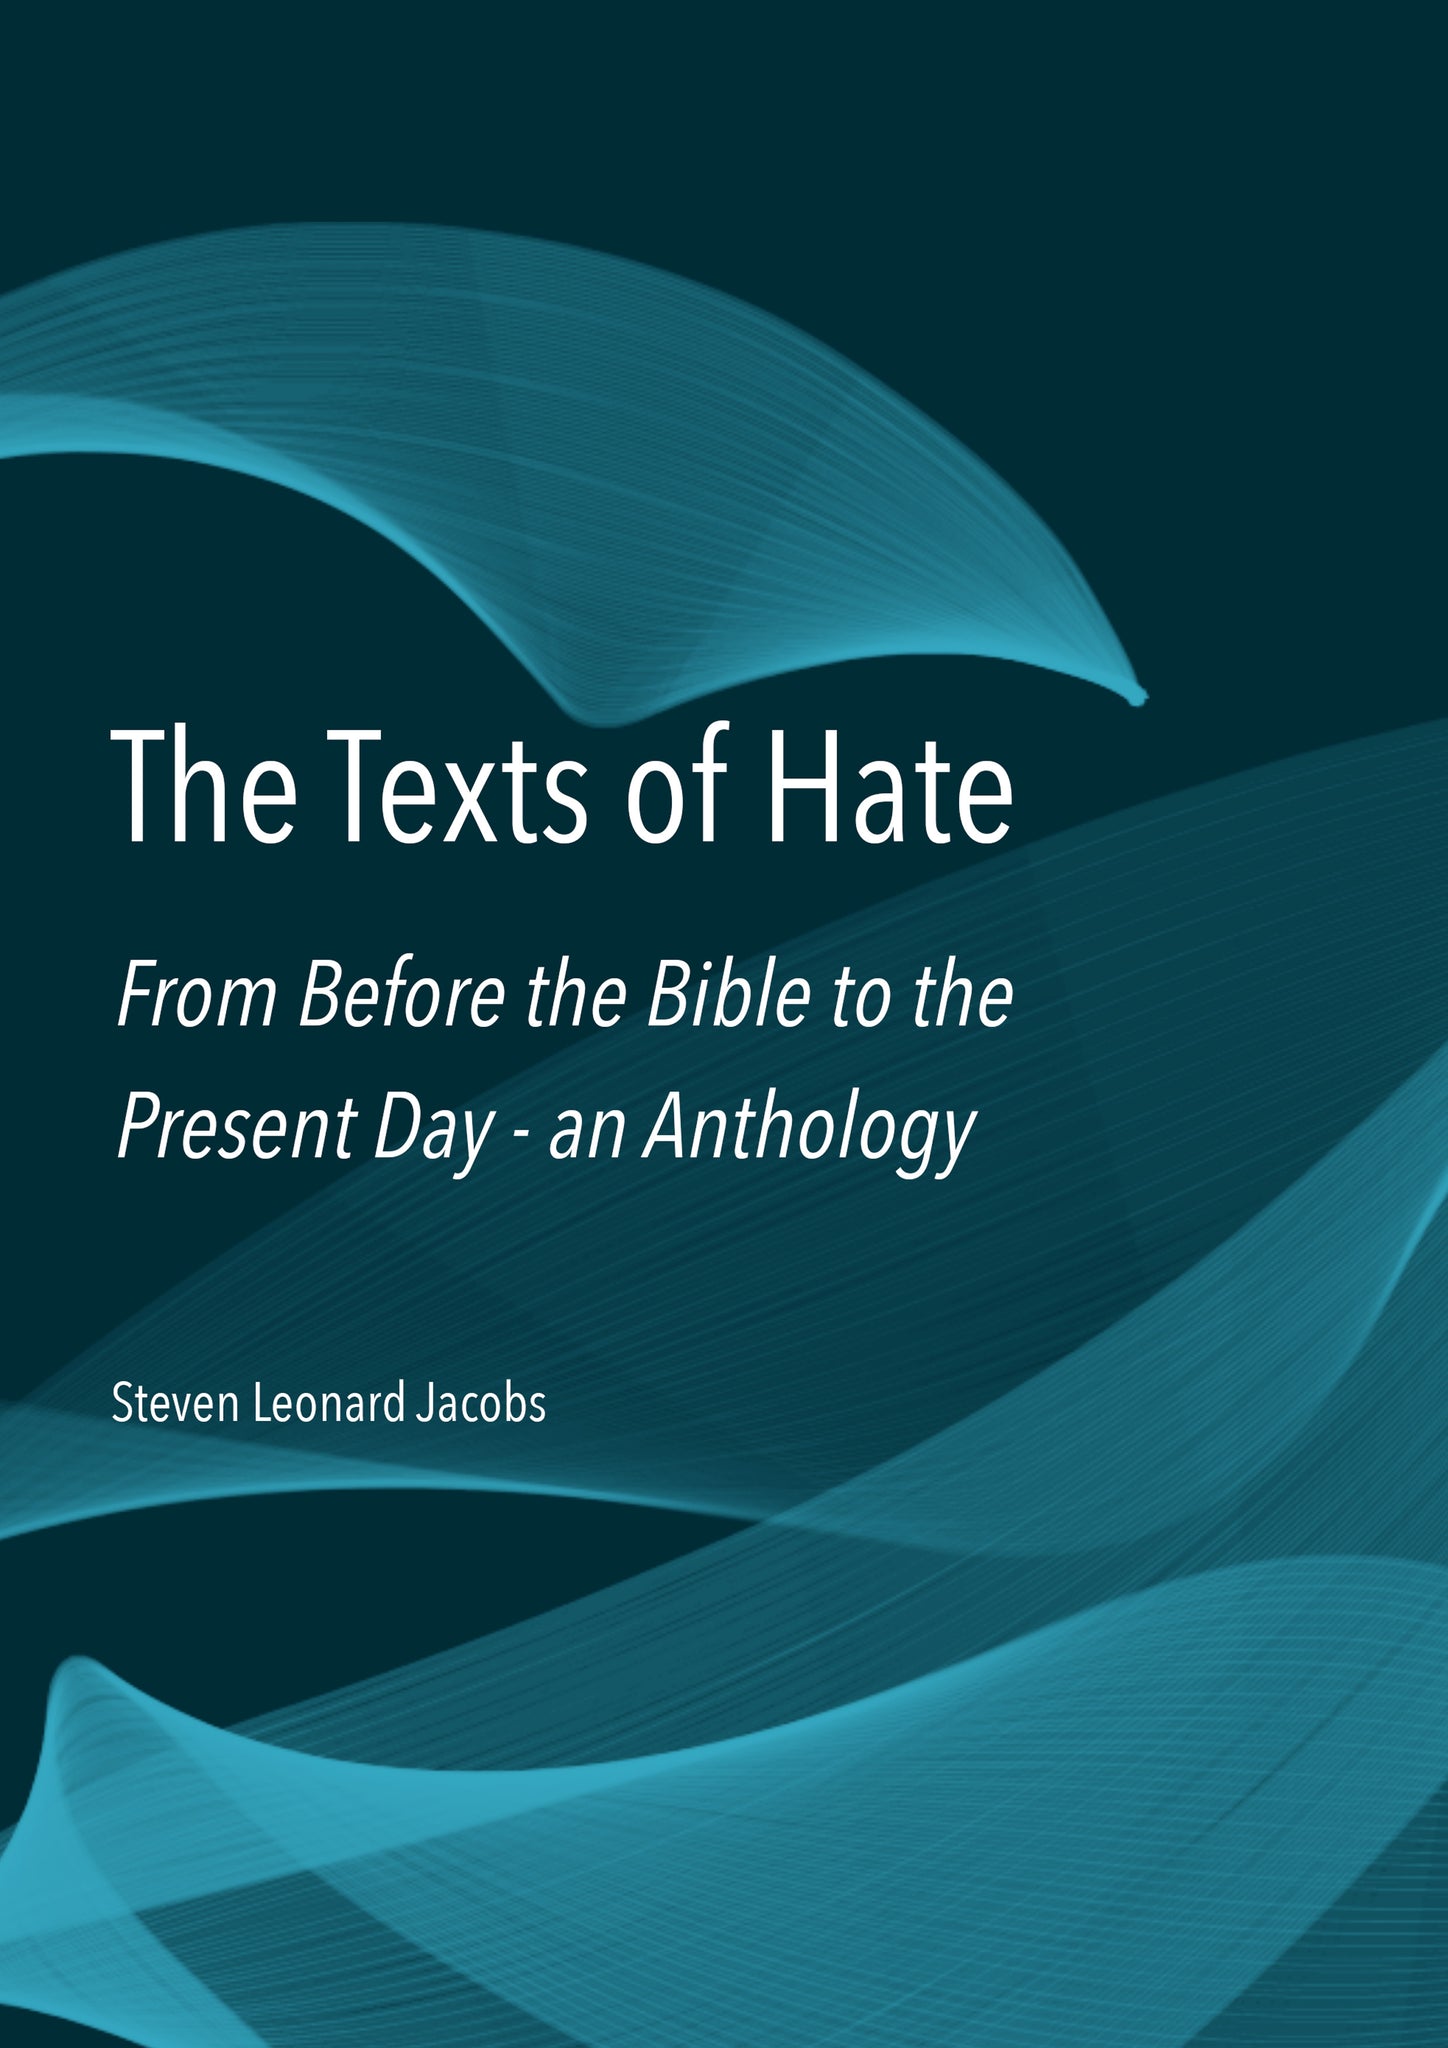 The Texts of Hate:  From Before the Bible to the Present Day - an Anthology